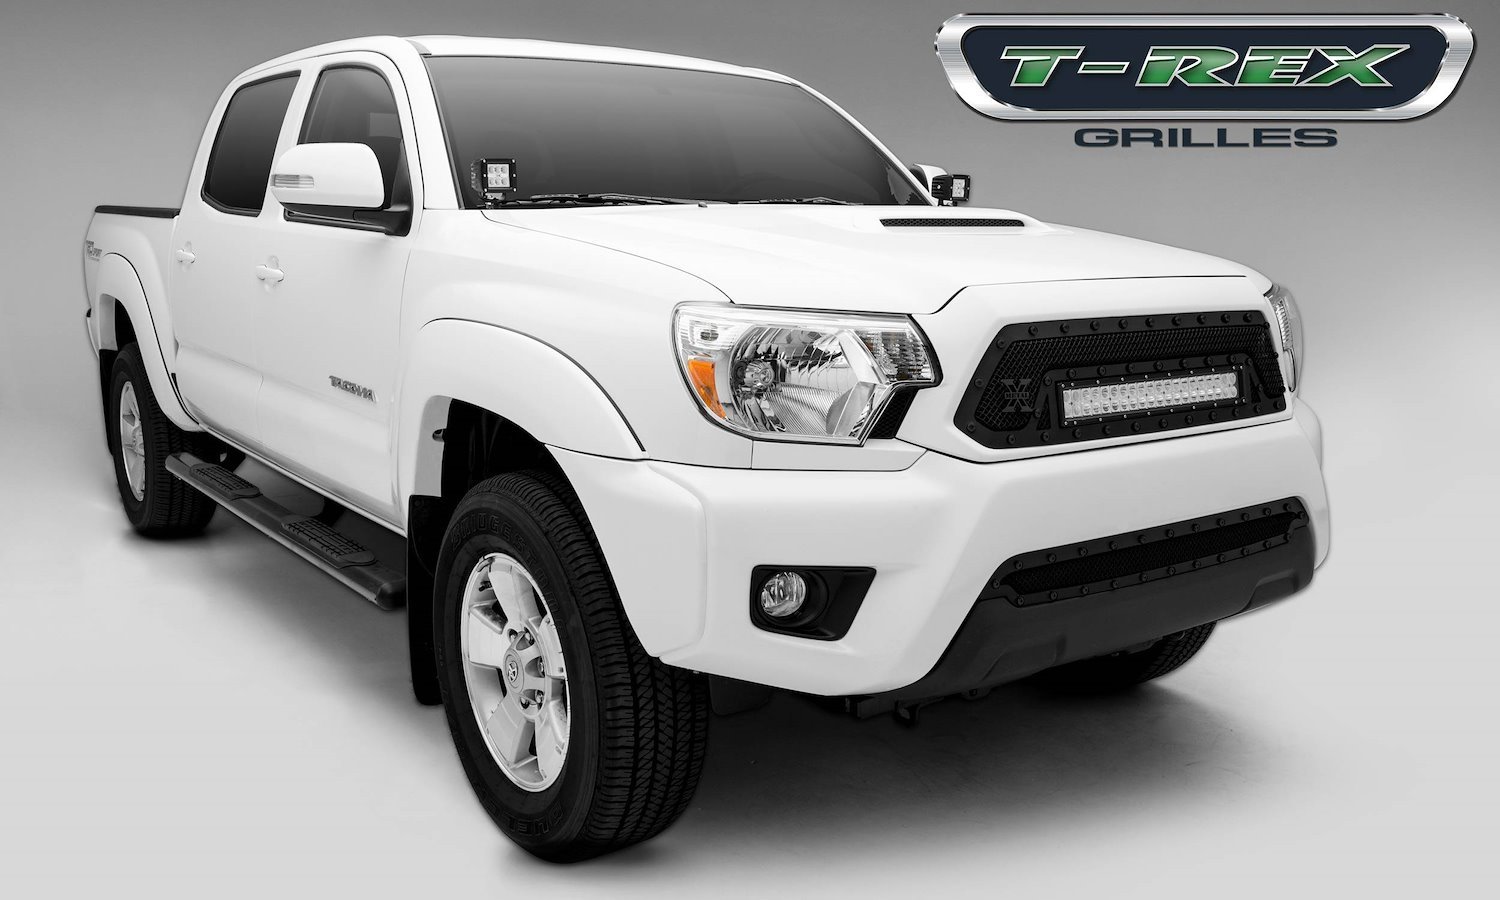 2012-2014 Toyota Tacoma TORCH Series LED Light Grille 1 - 20 LED Bar Formed Mesh Grille Main Insert